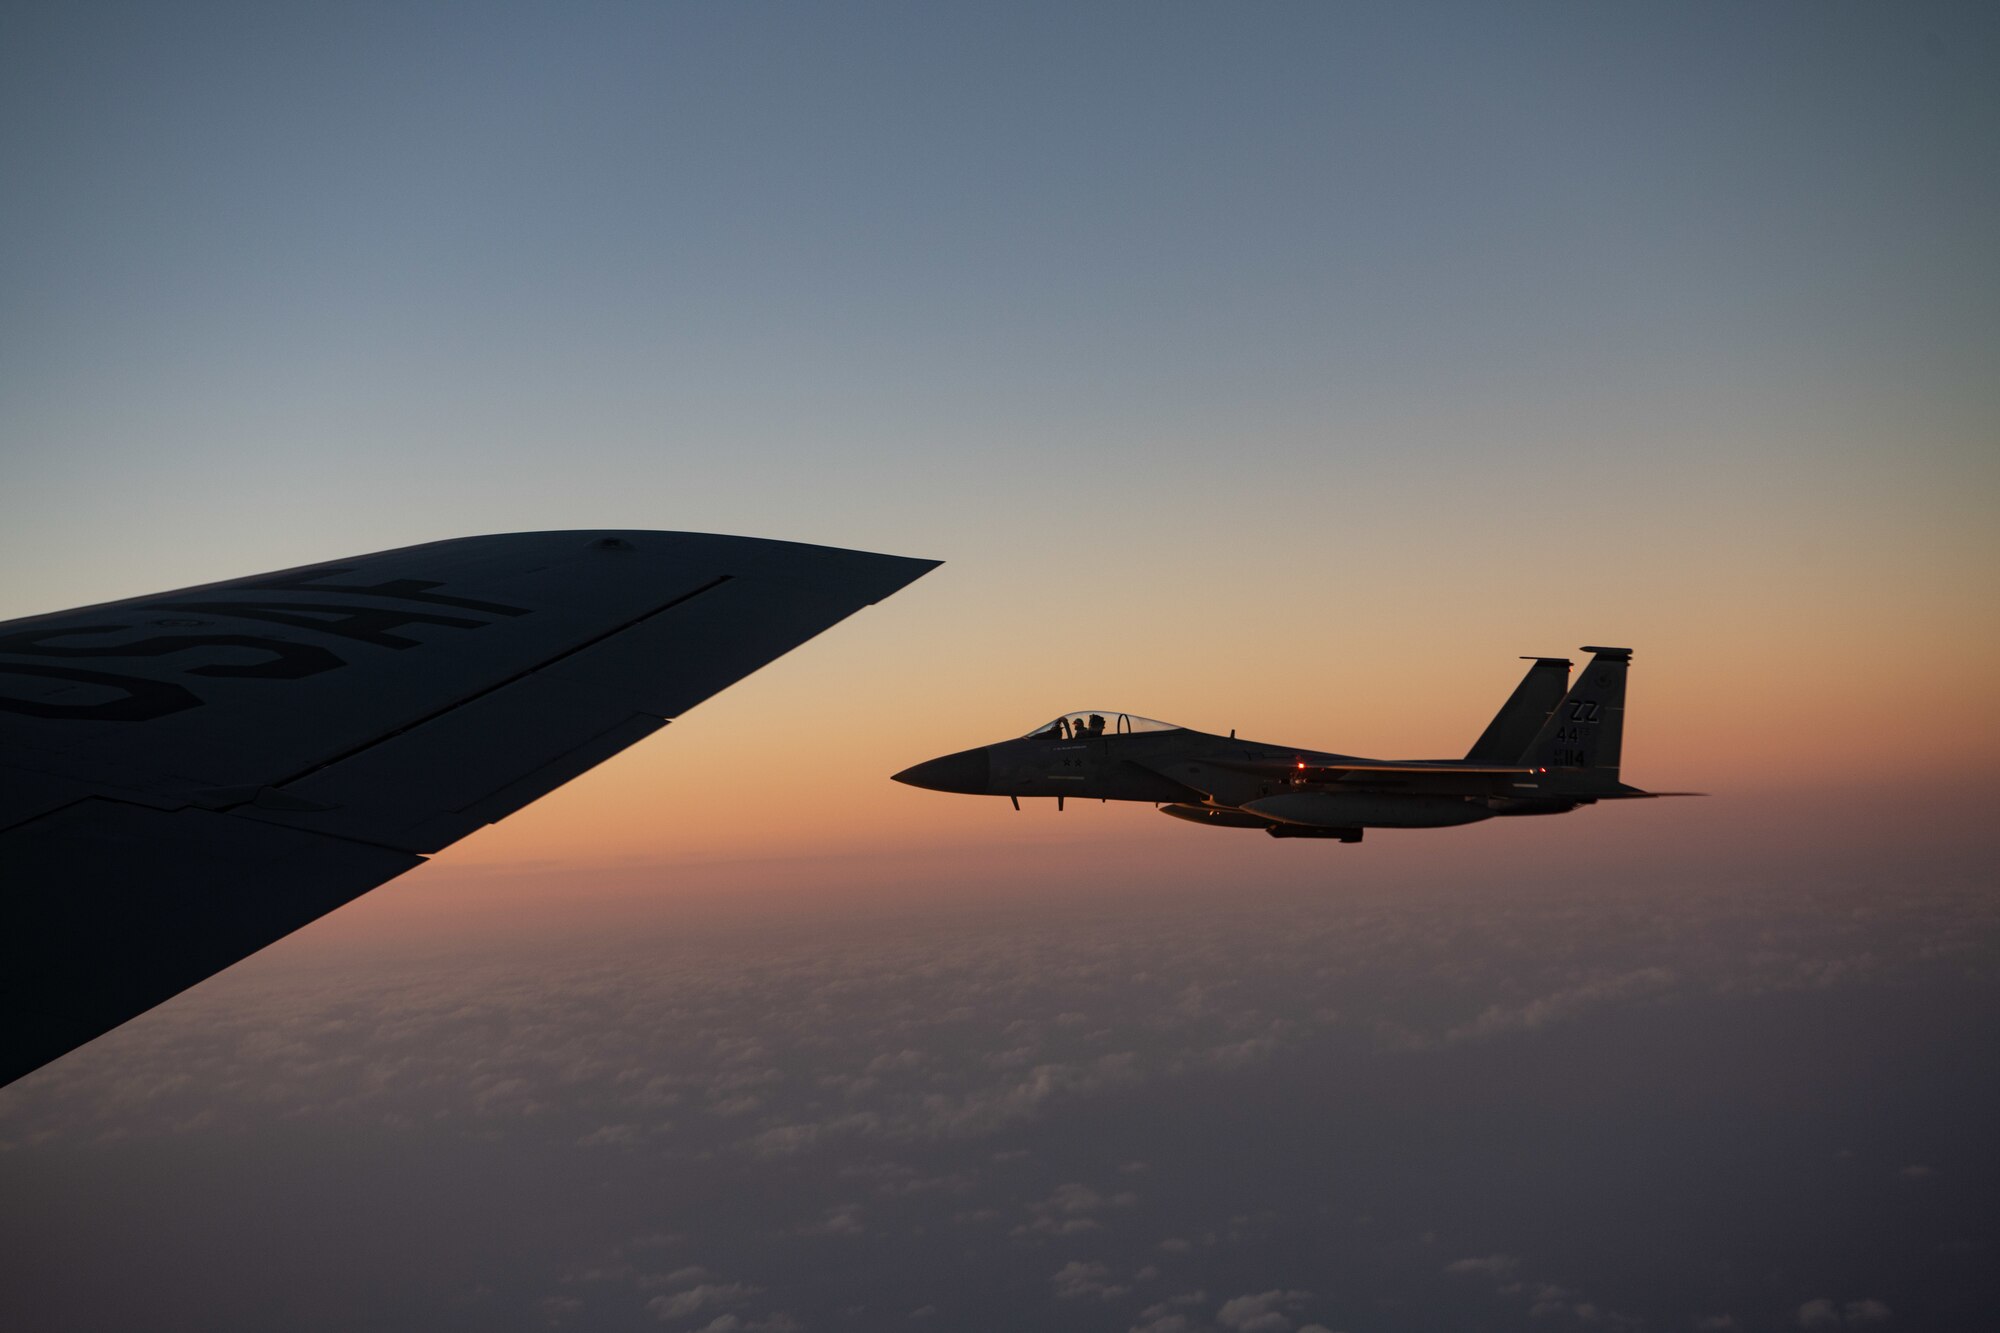 A U.S. Air Force F-15C Eagle flies next to a KC-135 Stratotanker from the 909th Air Refueling Squadron over the Pacific Ocean during Exercise Southern Beach, Oct. 28, 2021. This was the first time since the inception of Southern Beach in which the majority of the mission sets and a Japan-U.S. training program were conducted during night time hours. (U.S. Air Force photo by Staff Sgt. Savannah L. Waters)